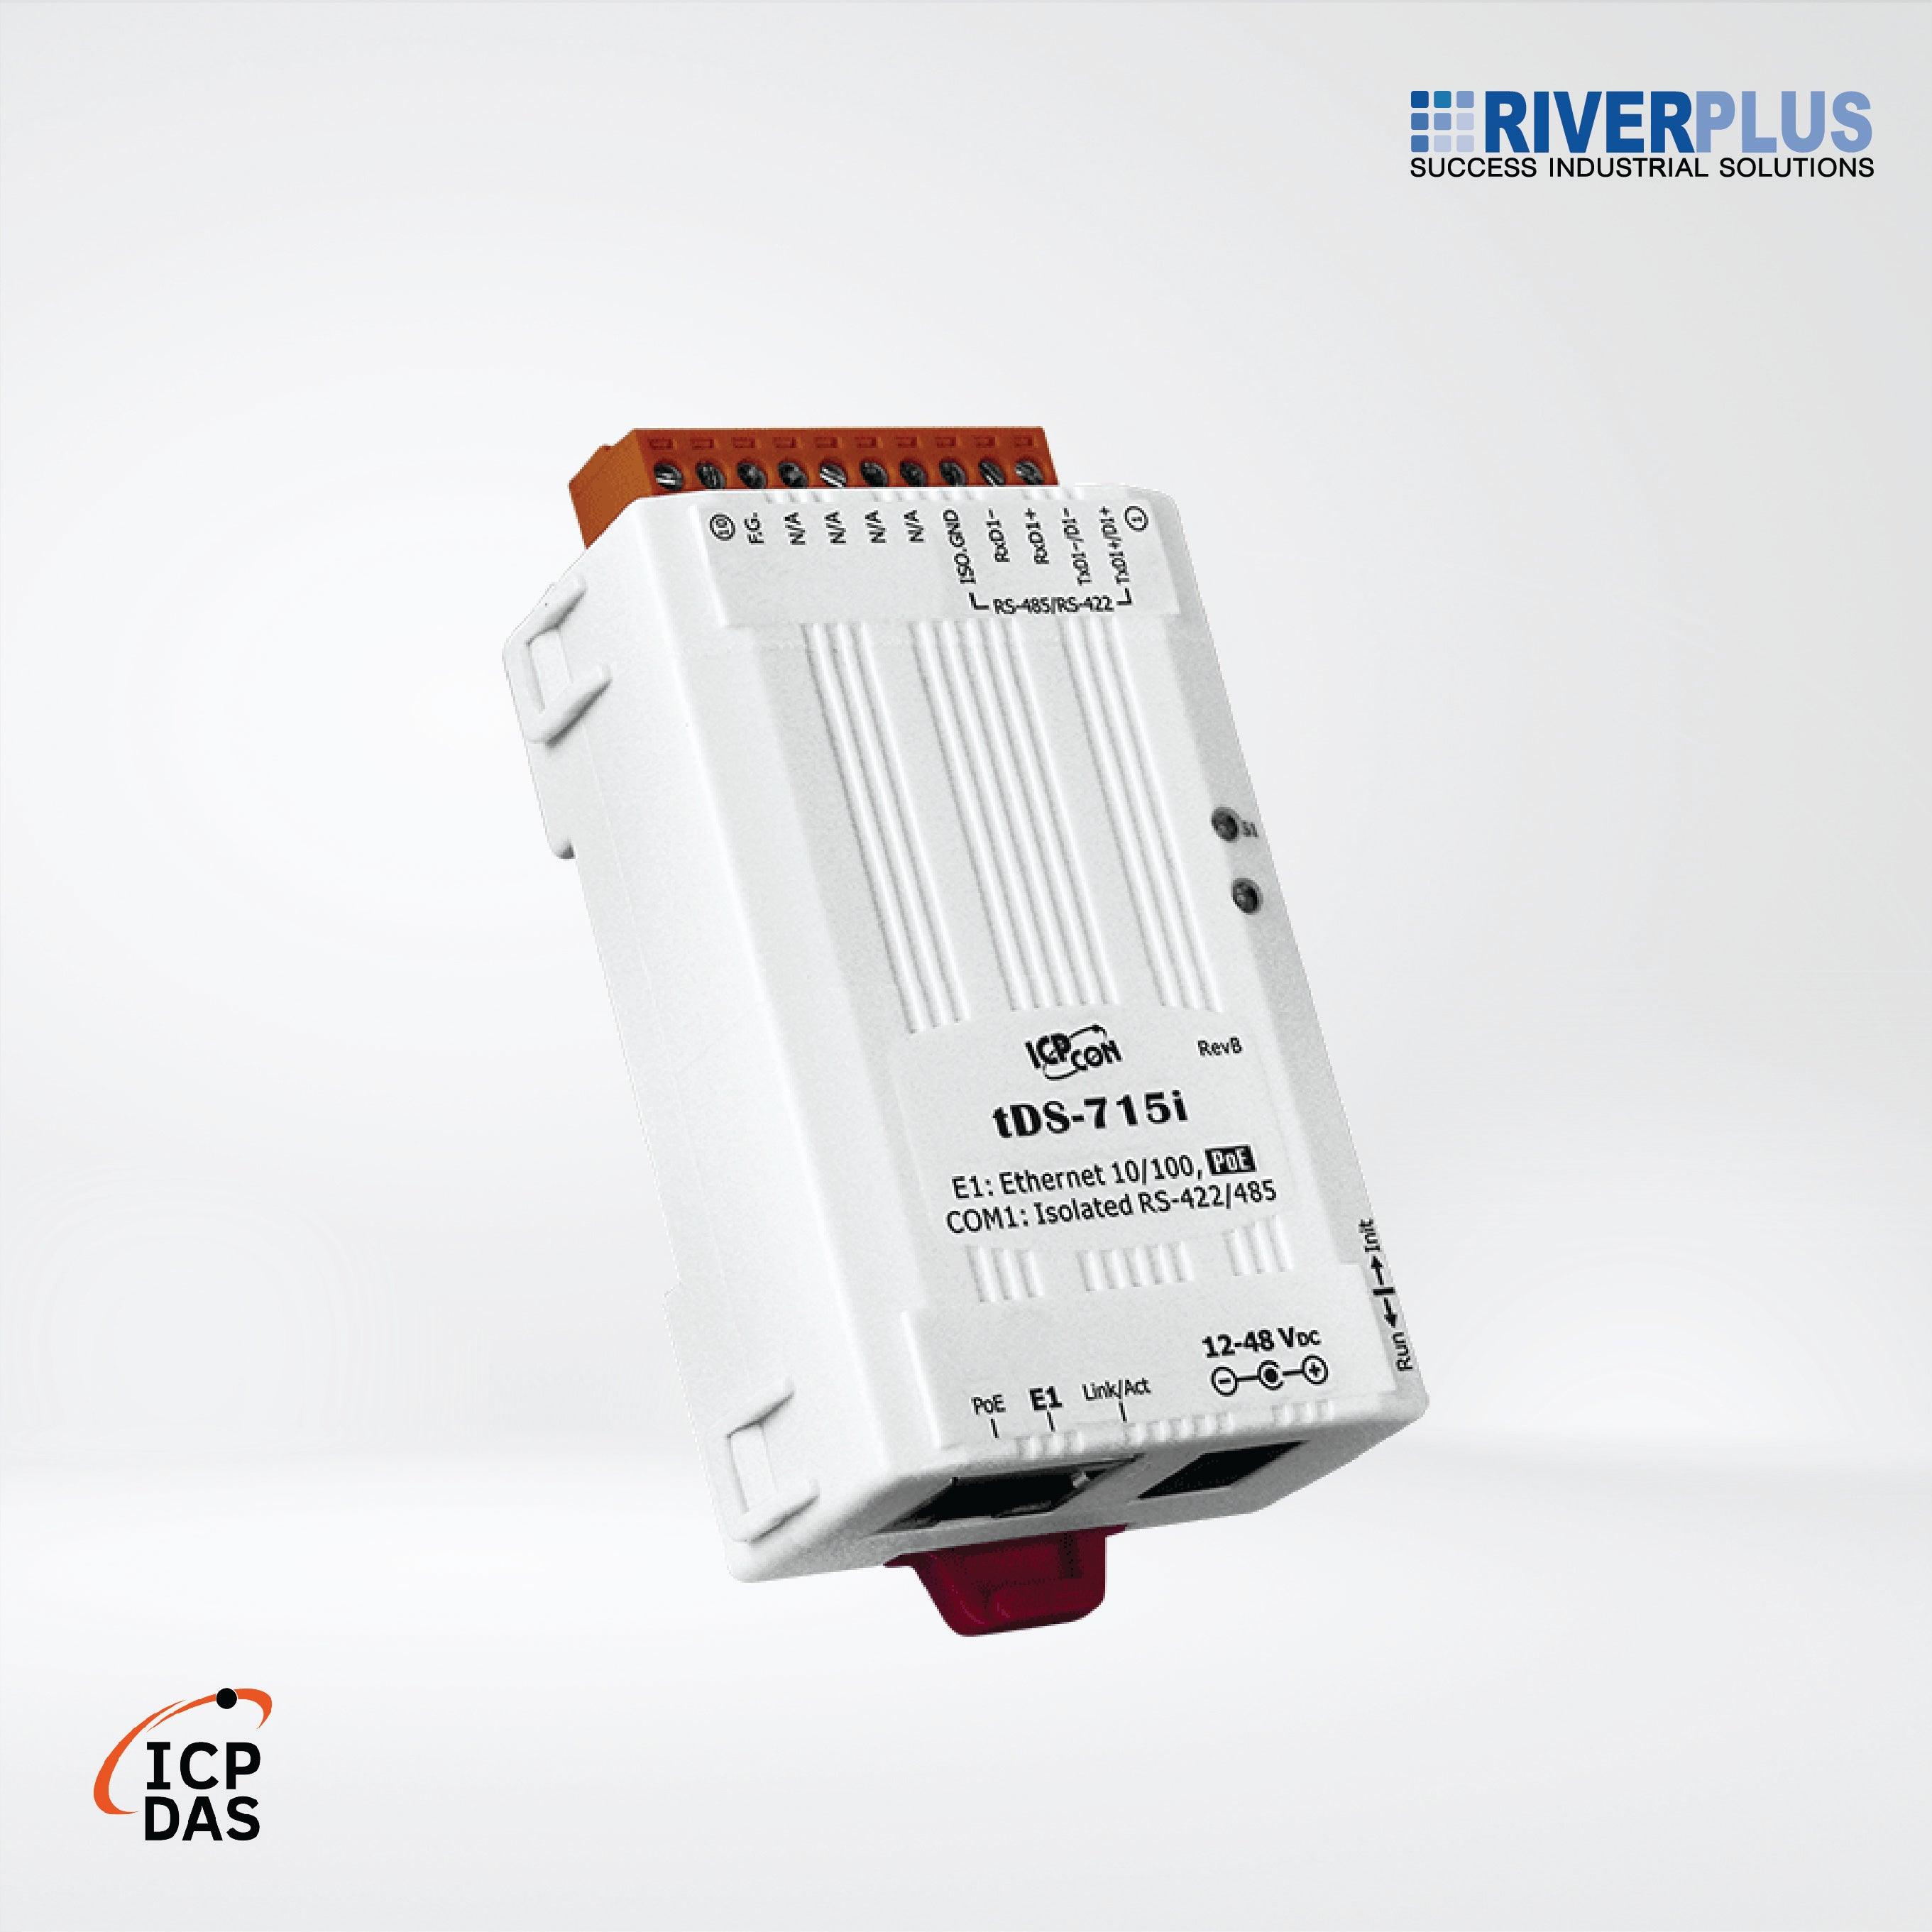 tDS-715i CR Tiny (1x Isolated RS-422/485) Serial-to-Ethernet Device Server with PoE - Riverplus